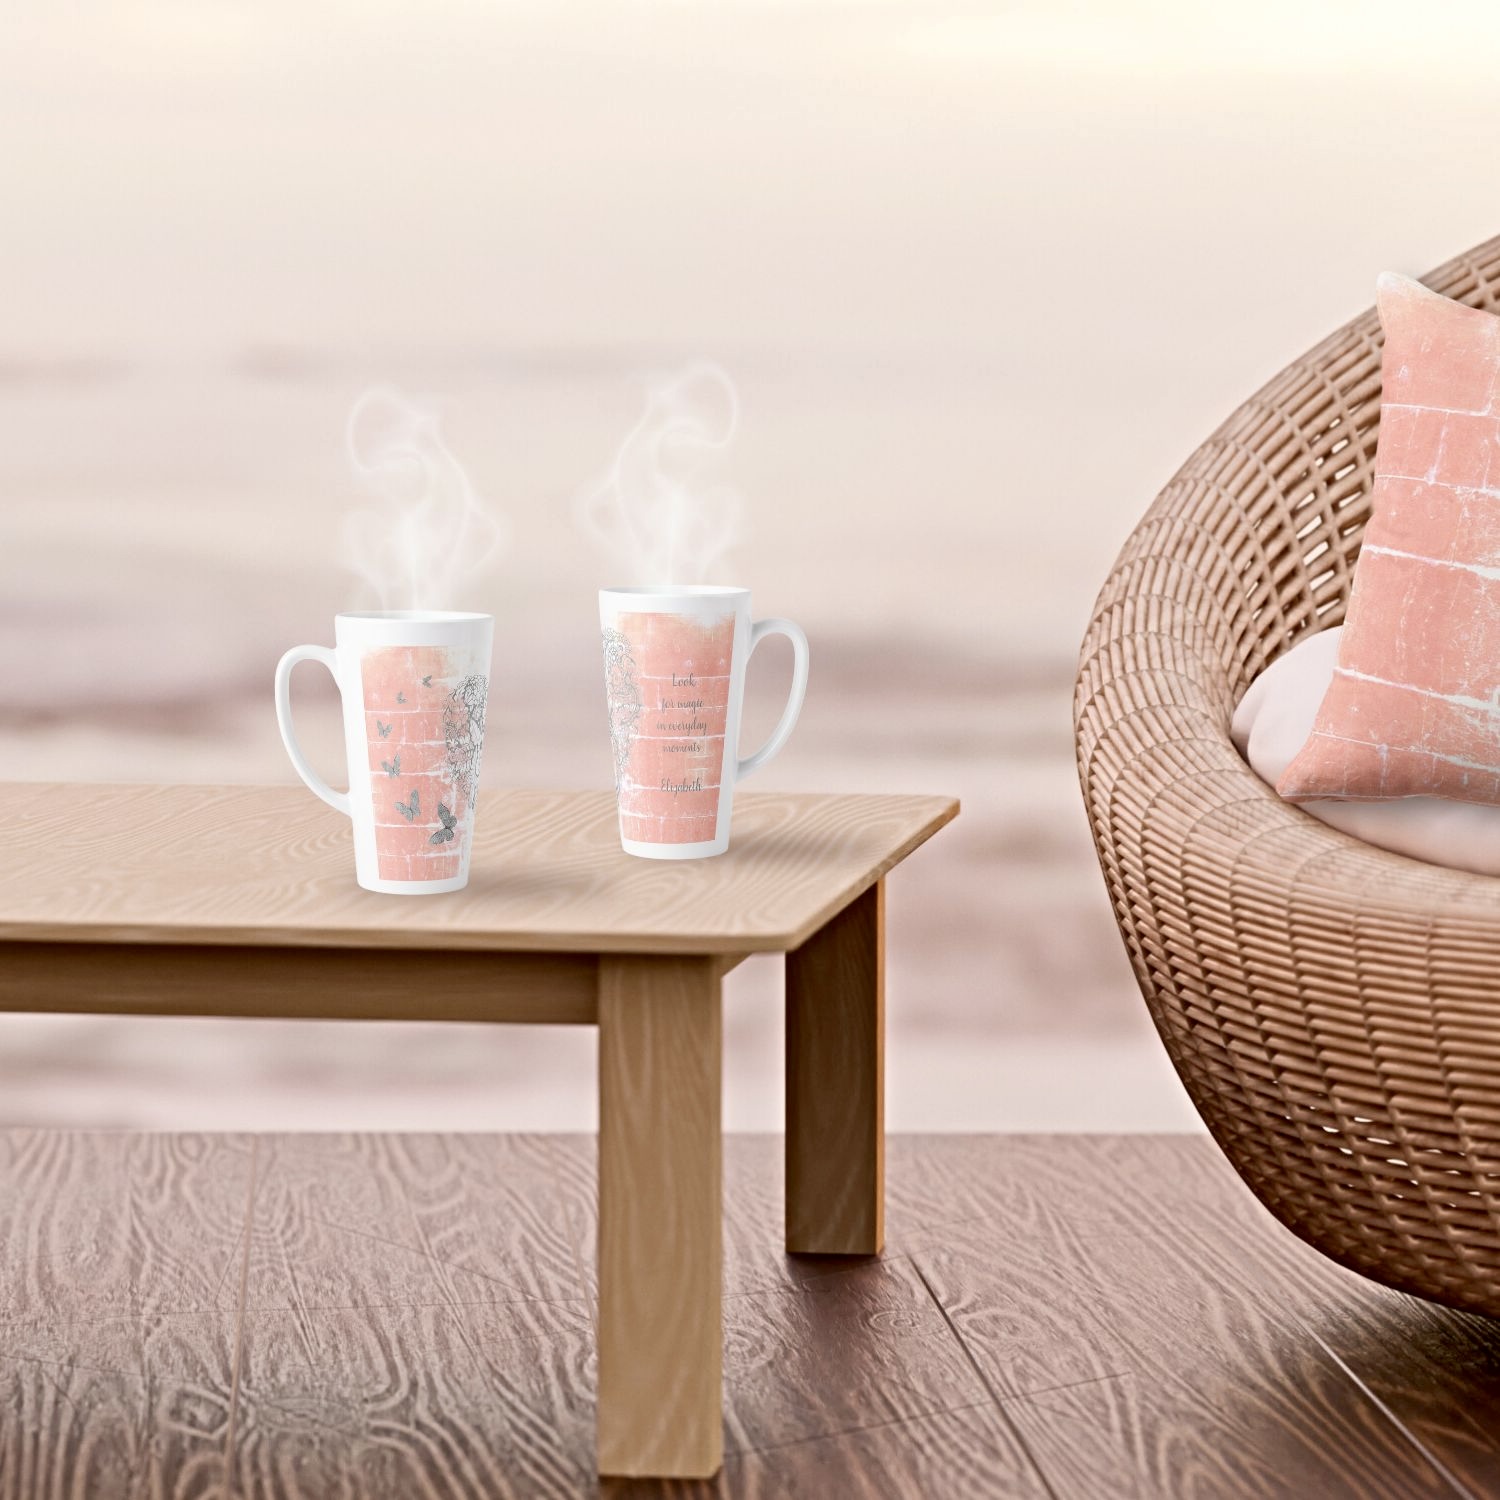 A latte mug and throw pillow featuring matching rustic peach designs, with a gray heart surrounded by silver butterflies, in a coastal-themed ambiance with wicker furniture.